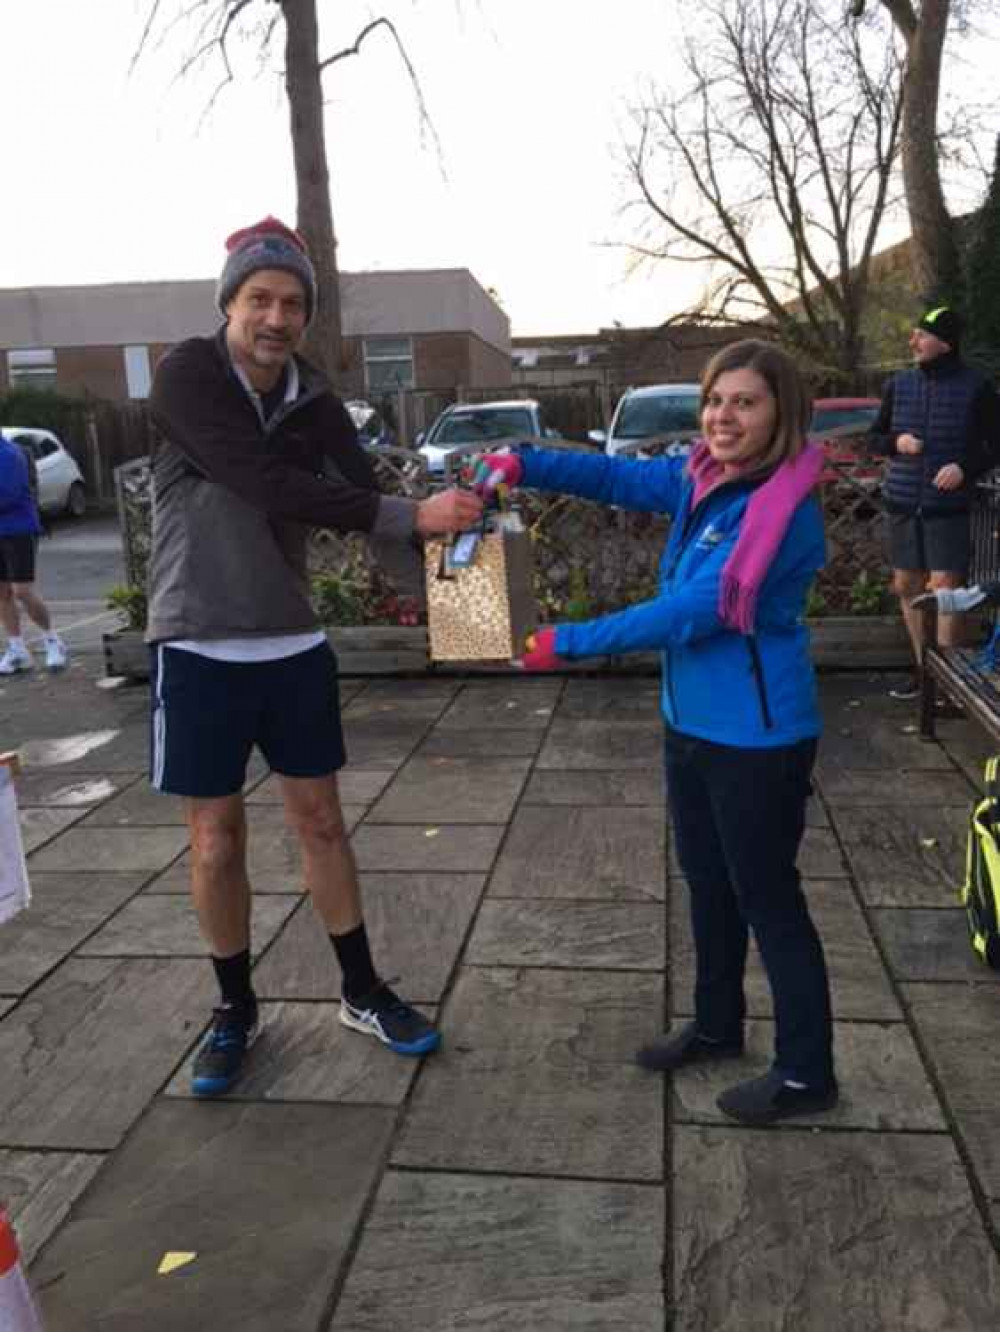 Mark Smith receives his prize for being one of the winners of the Festive Fun Tournament from Becky Spall from sponsors Barking Mad.